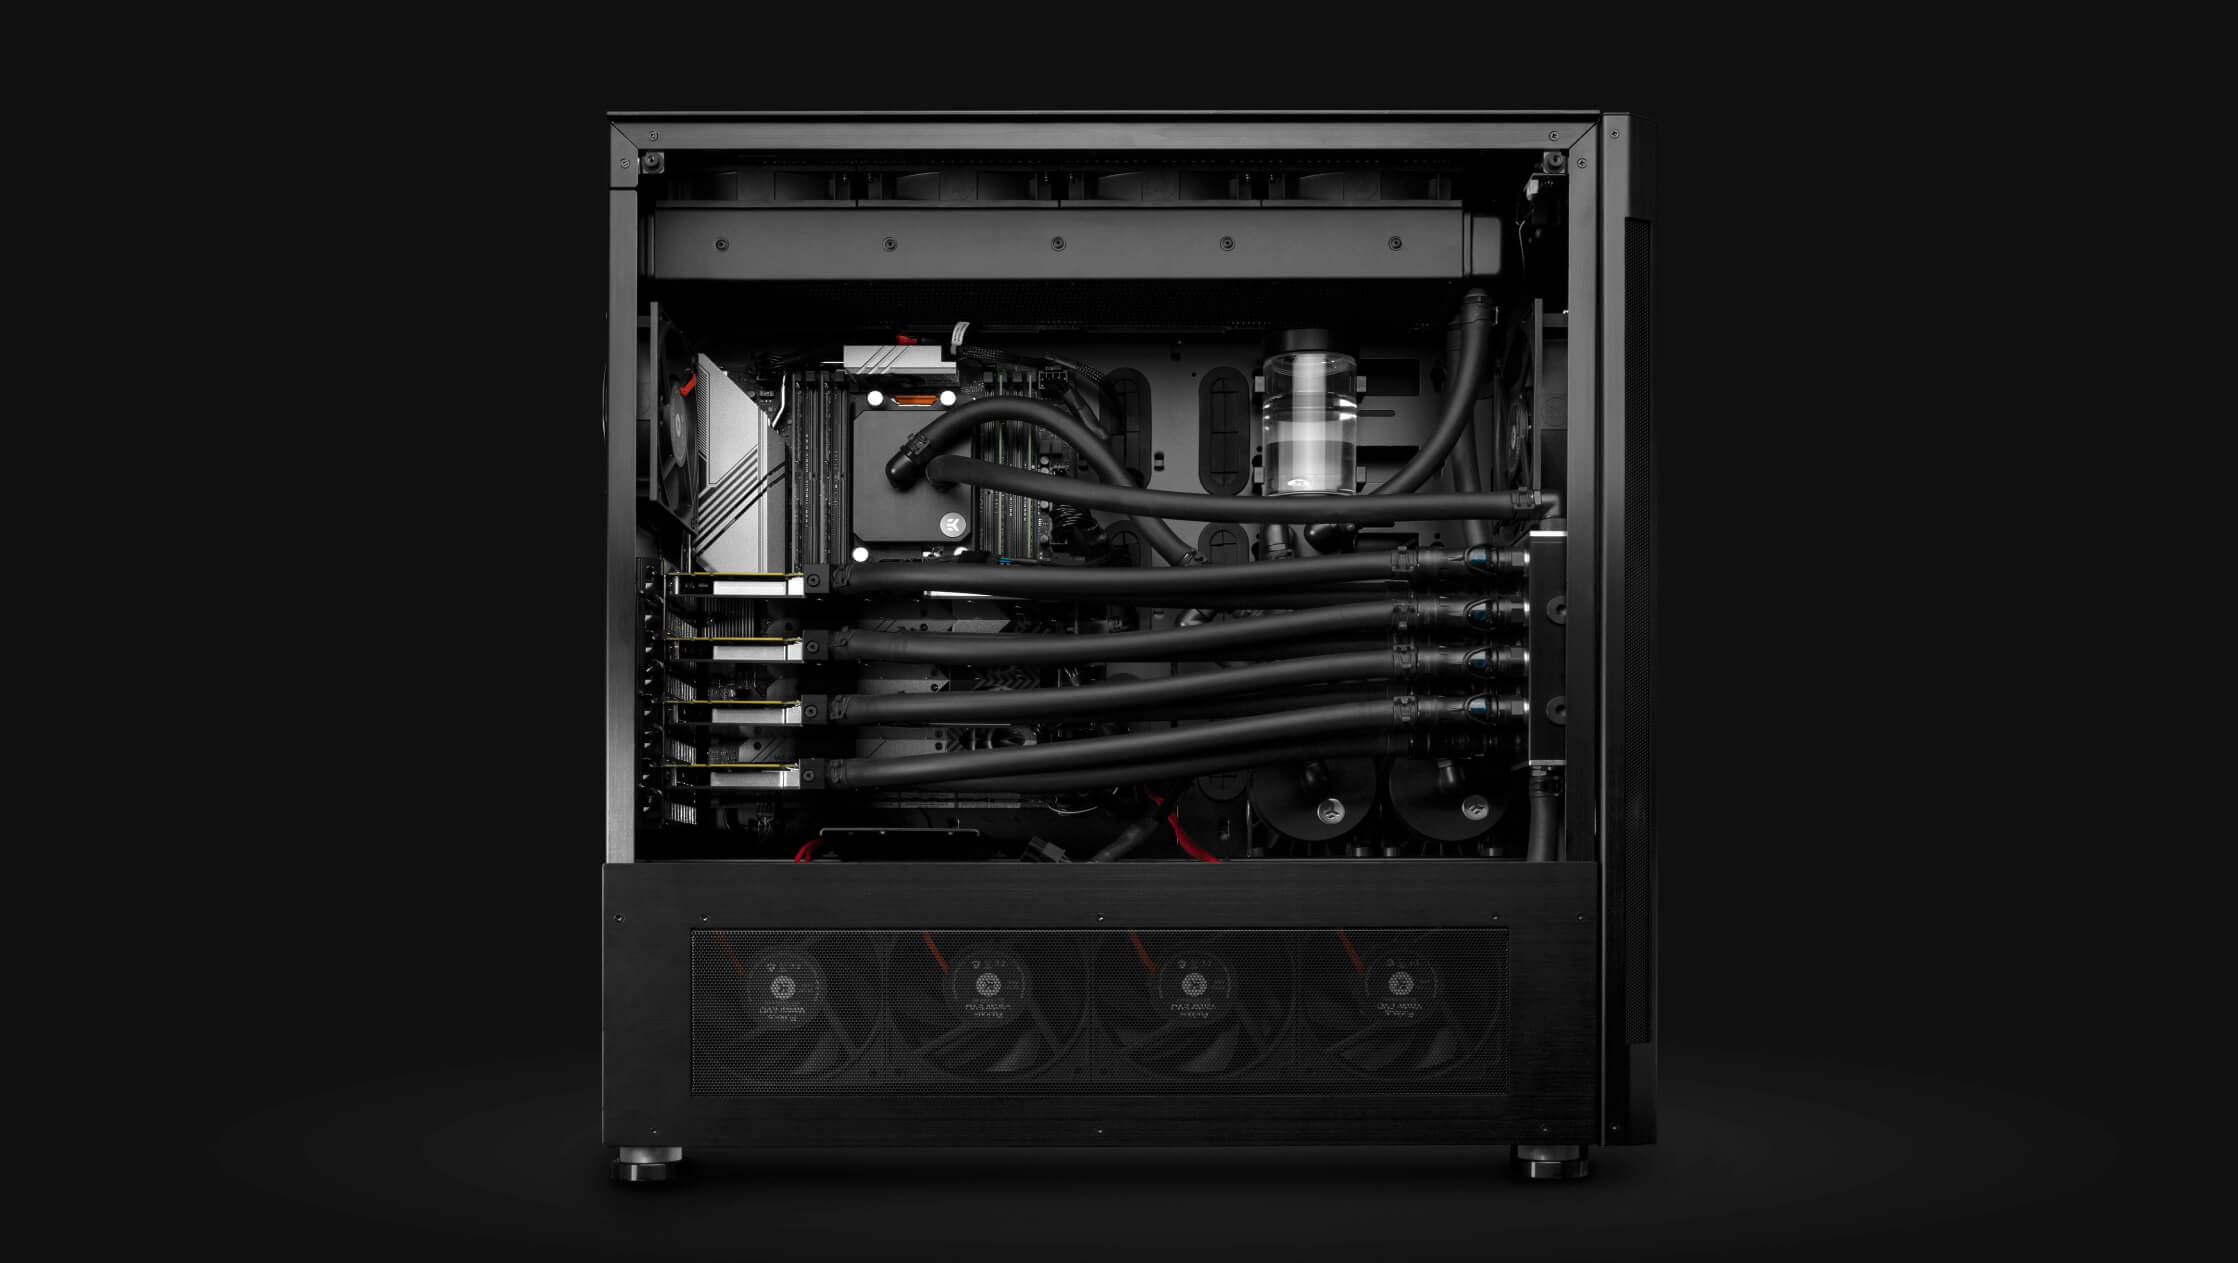 EK-Fluid Works Studio Series S5000 workstation with 4 GPUs and high-performance CPU – well beyond Blender hardware requirements